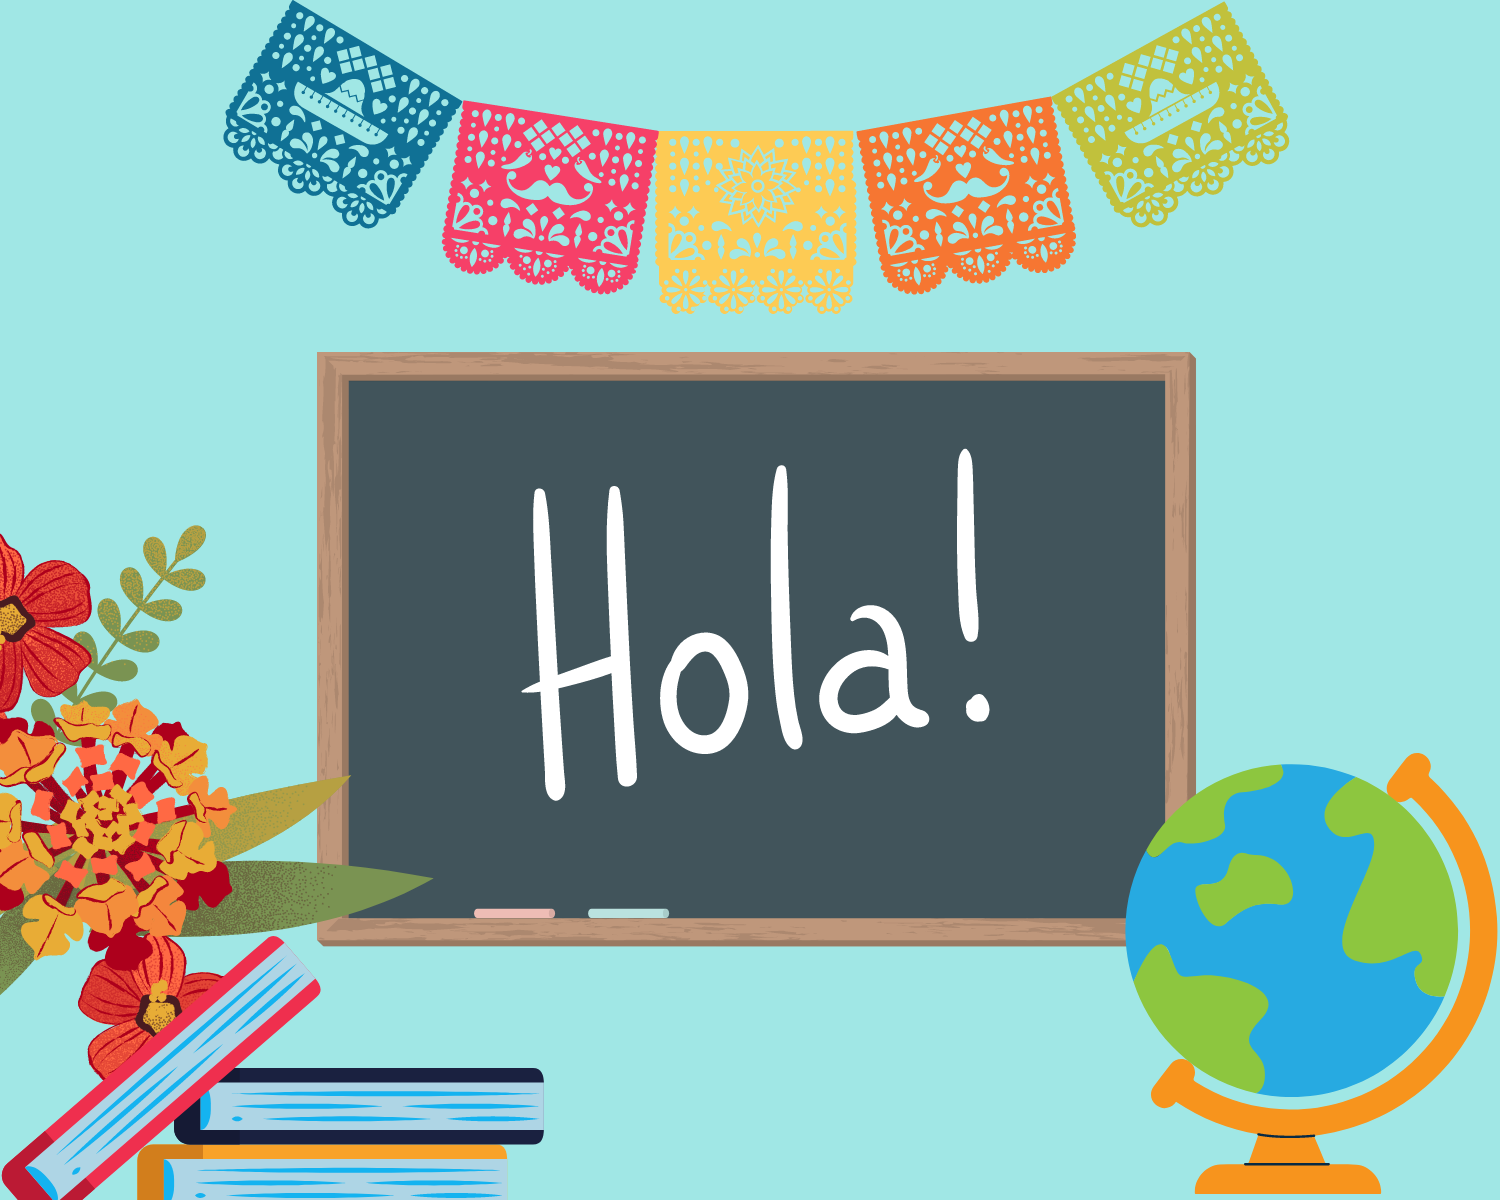 A blackboard with the word Hola, a globe, books, a Spanish-style garland and flowers